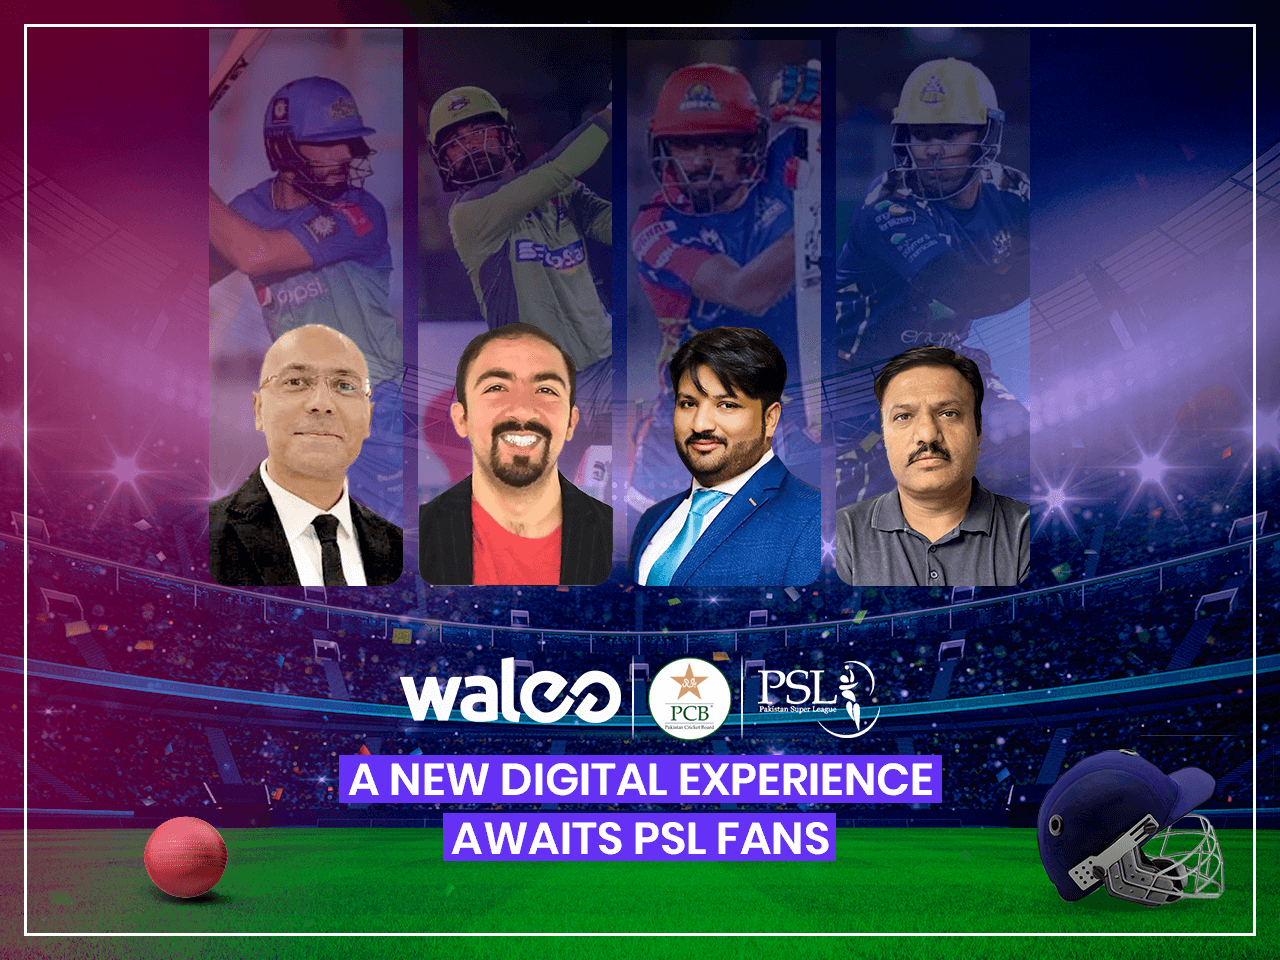 WALEE TEASES A NEW DIGITAL EXPERIENCE FOR PSL FANS